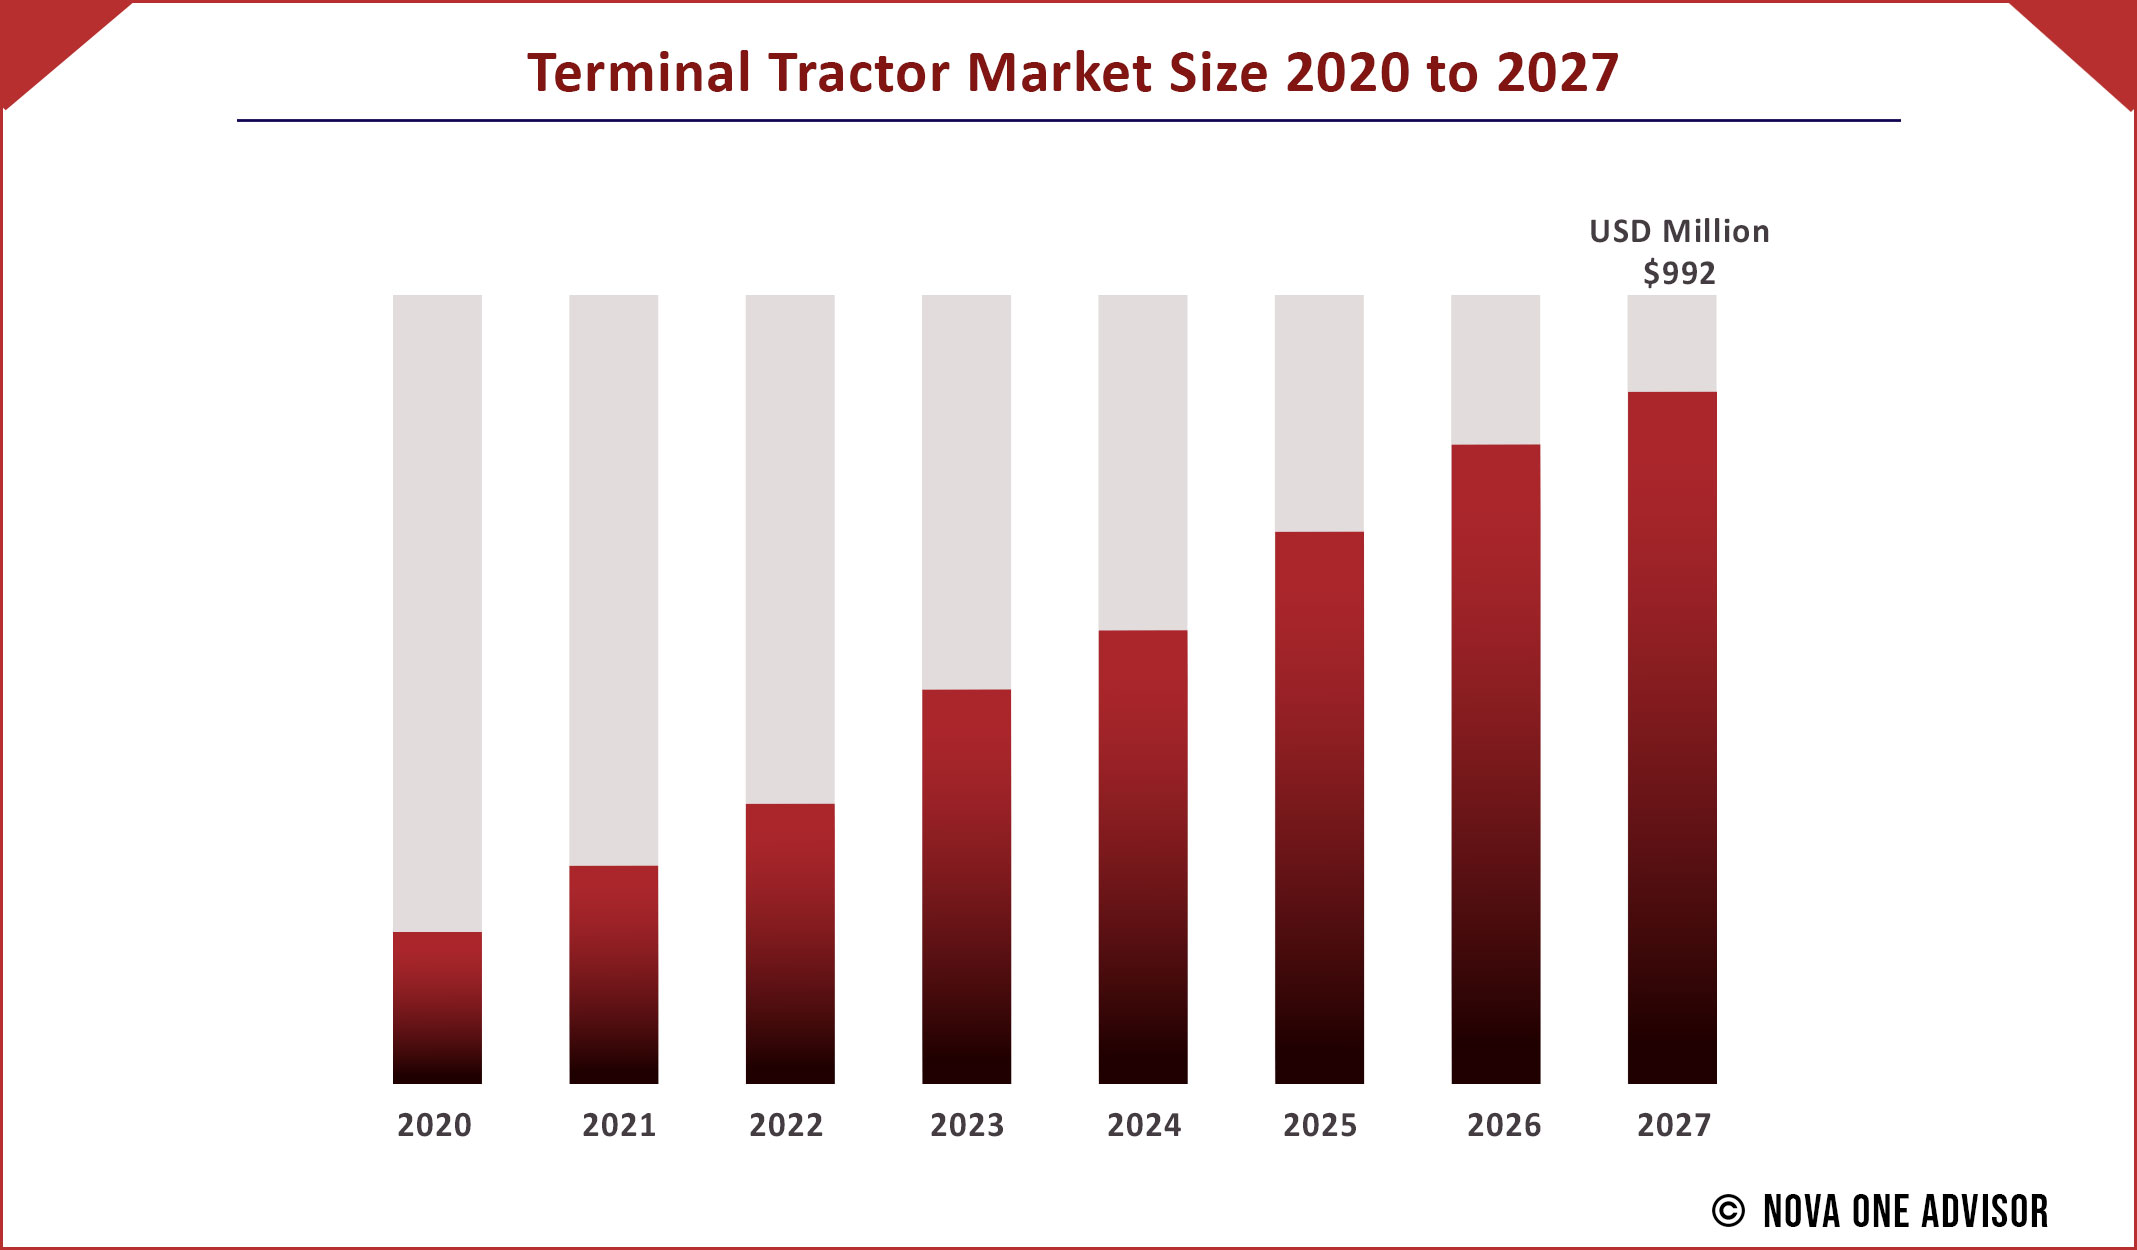 Terminal Tractor Market Size 2020 to 2027